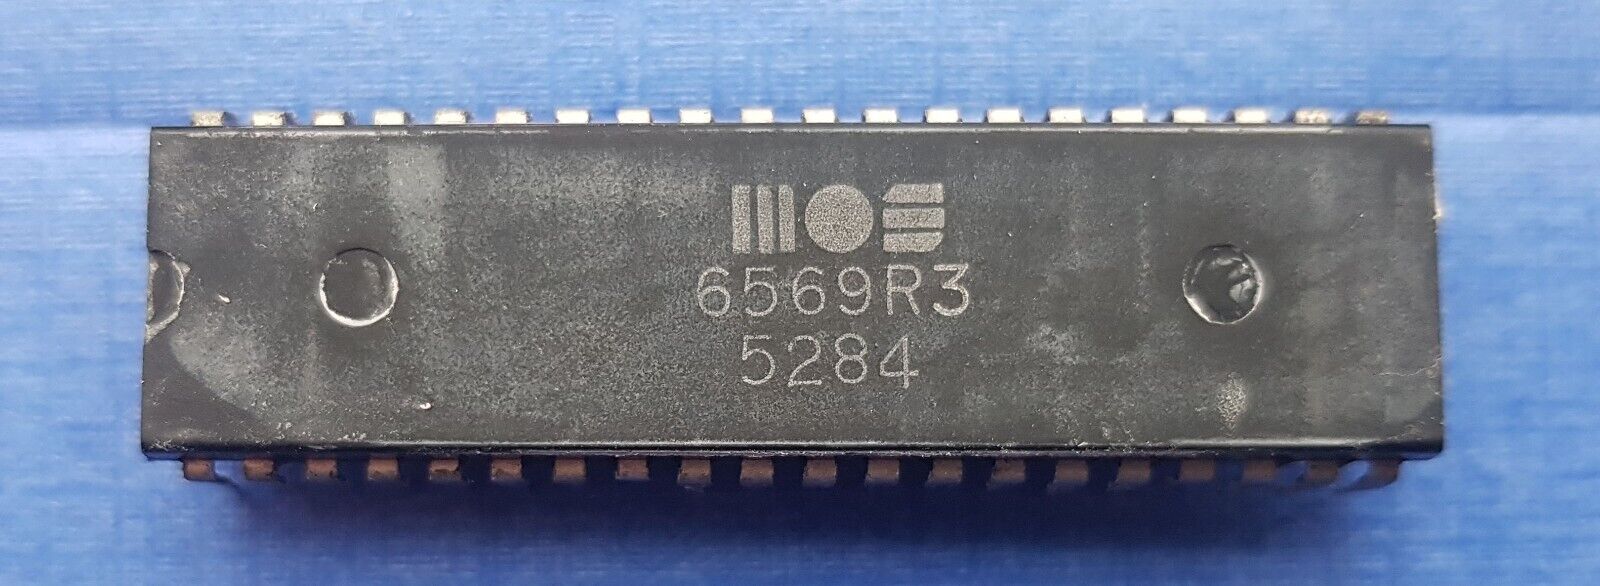 MOS 6569R3 | MOS 6569 R3 VIC II PAL Video Chip for Commodore 64 Genuine Part